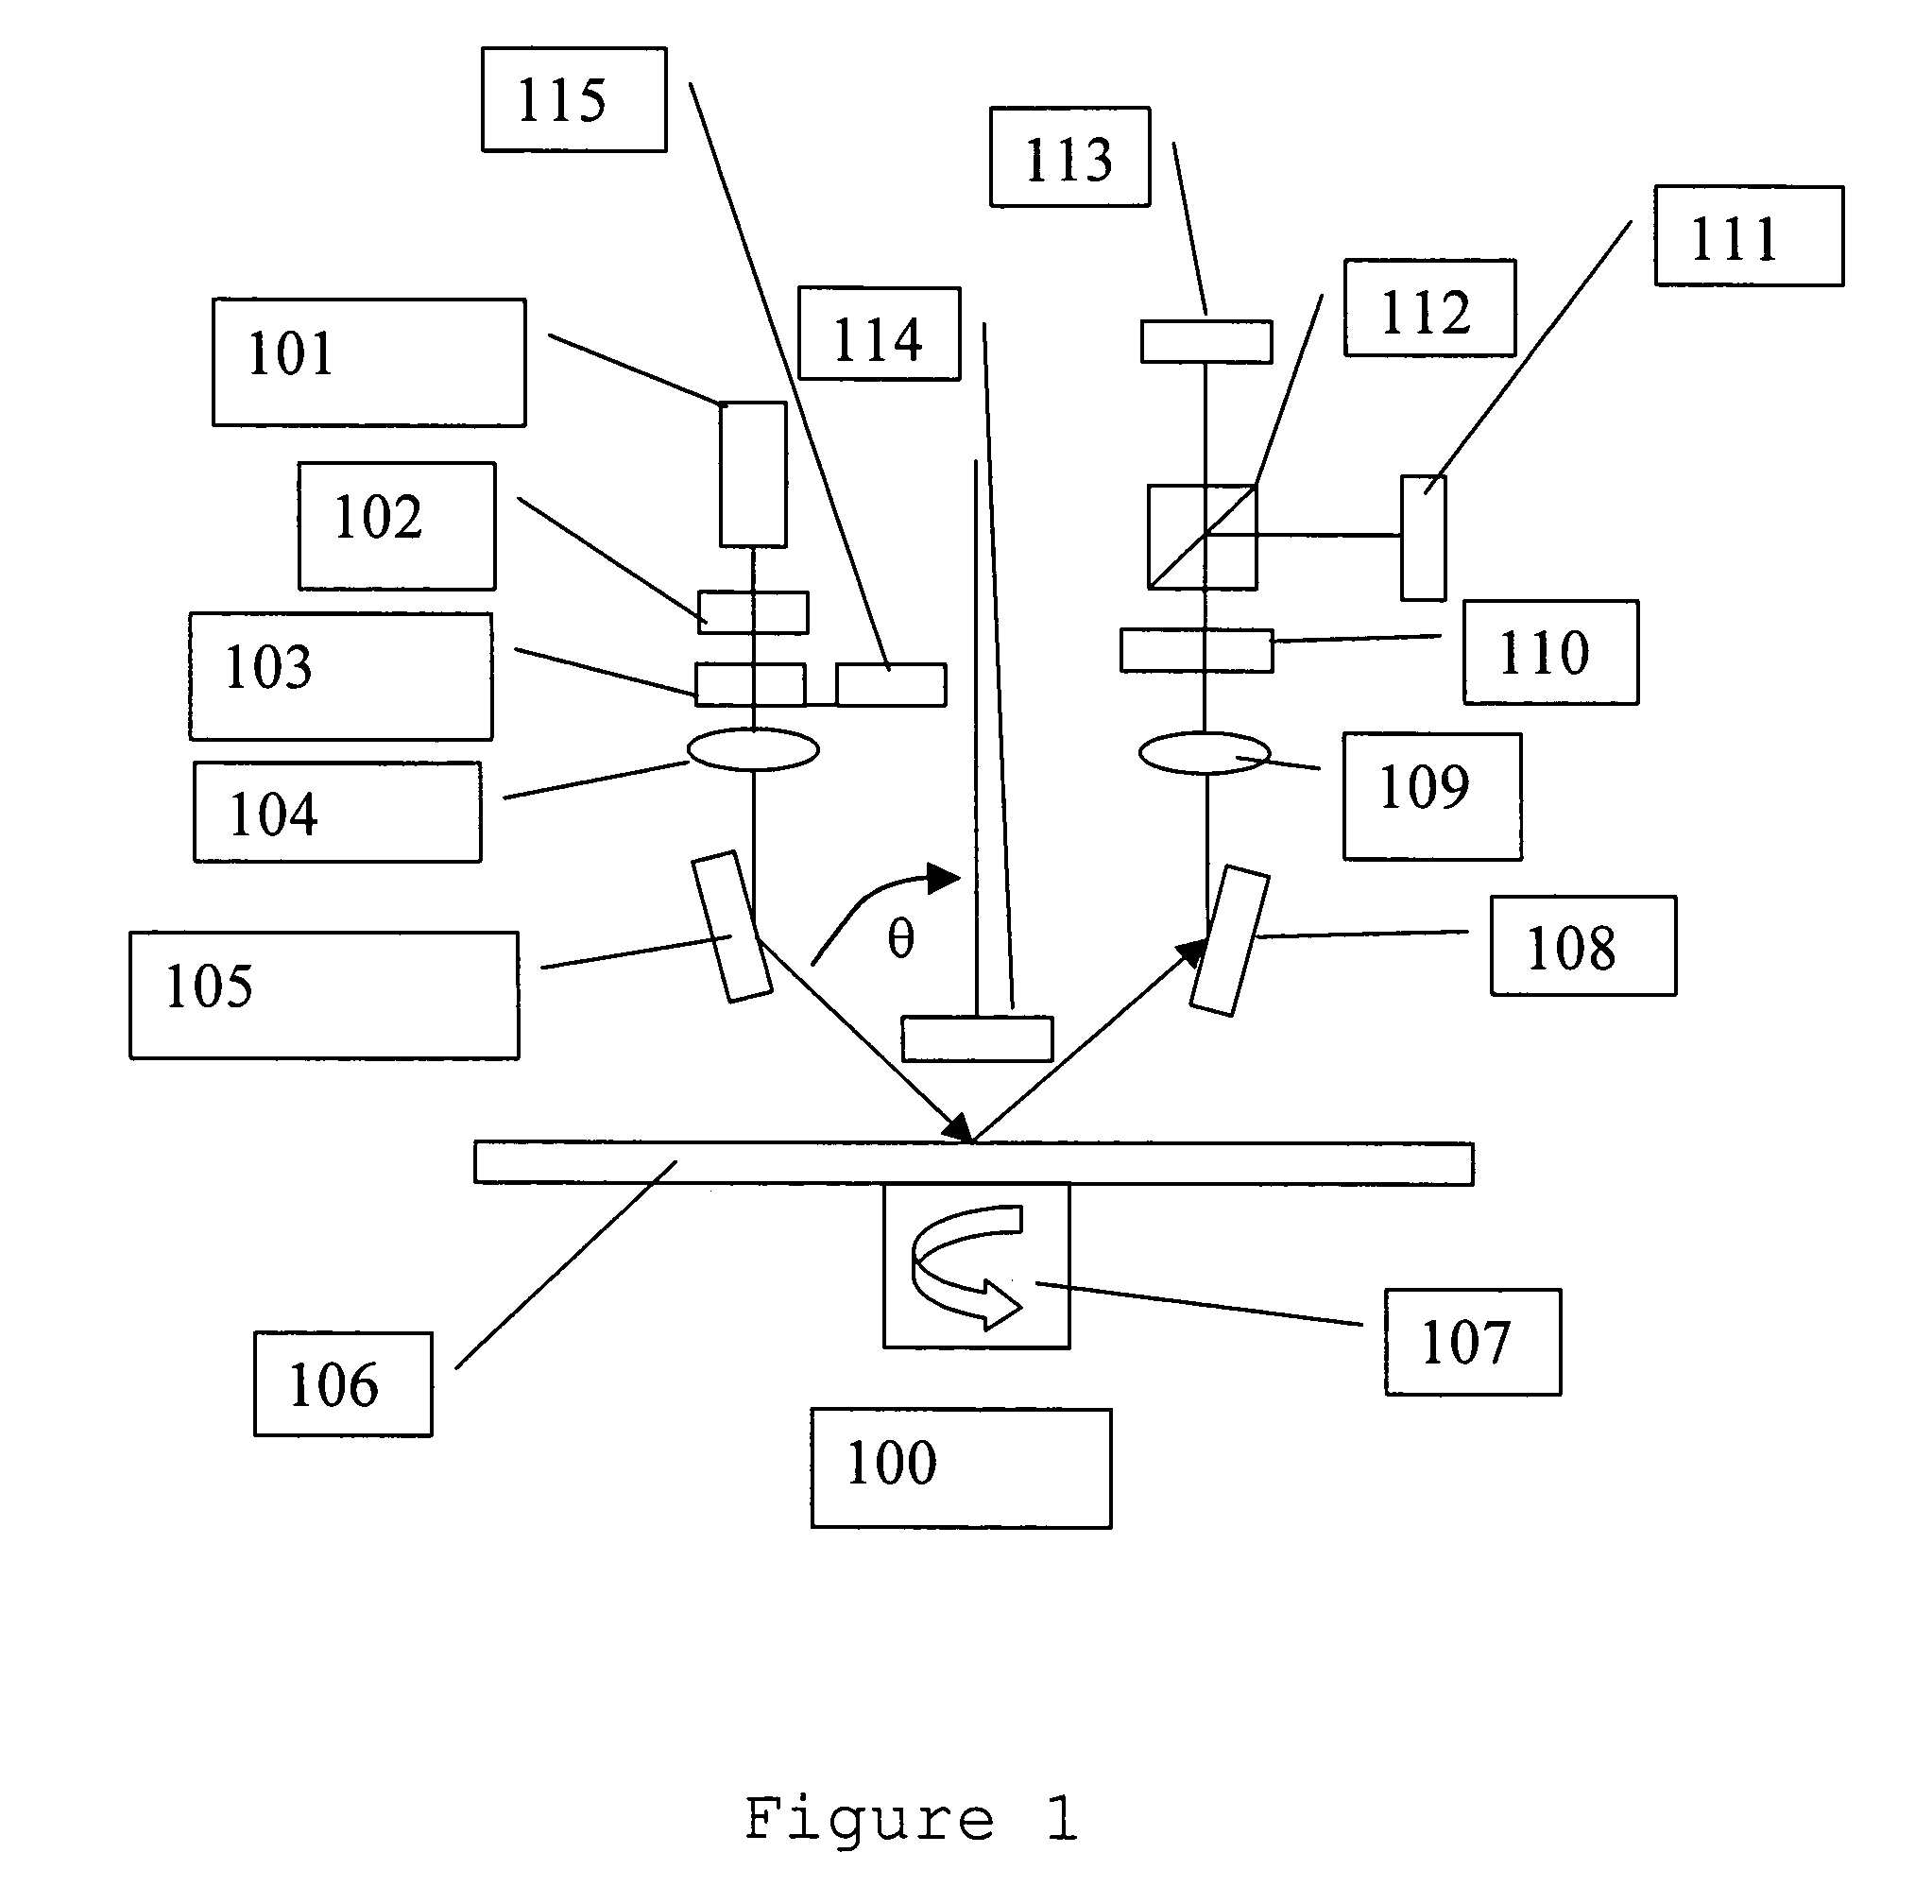 System and method for classifying, detecting, and counting micropipes